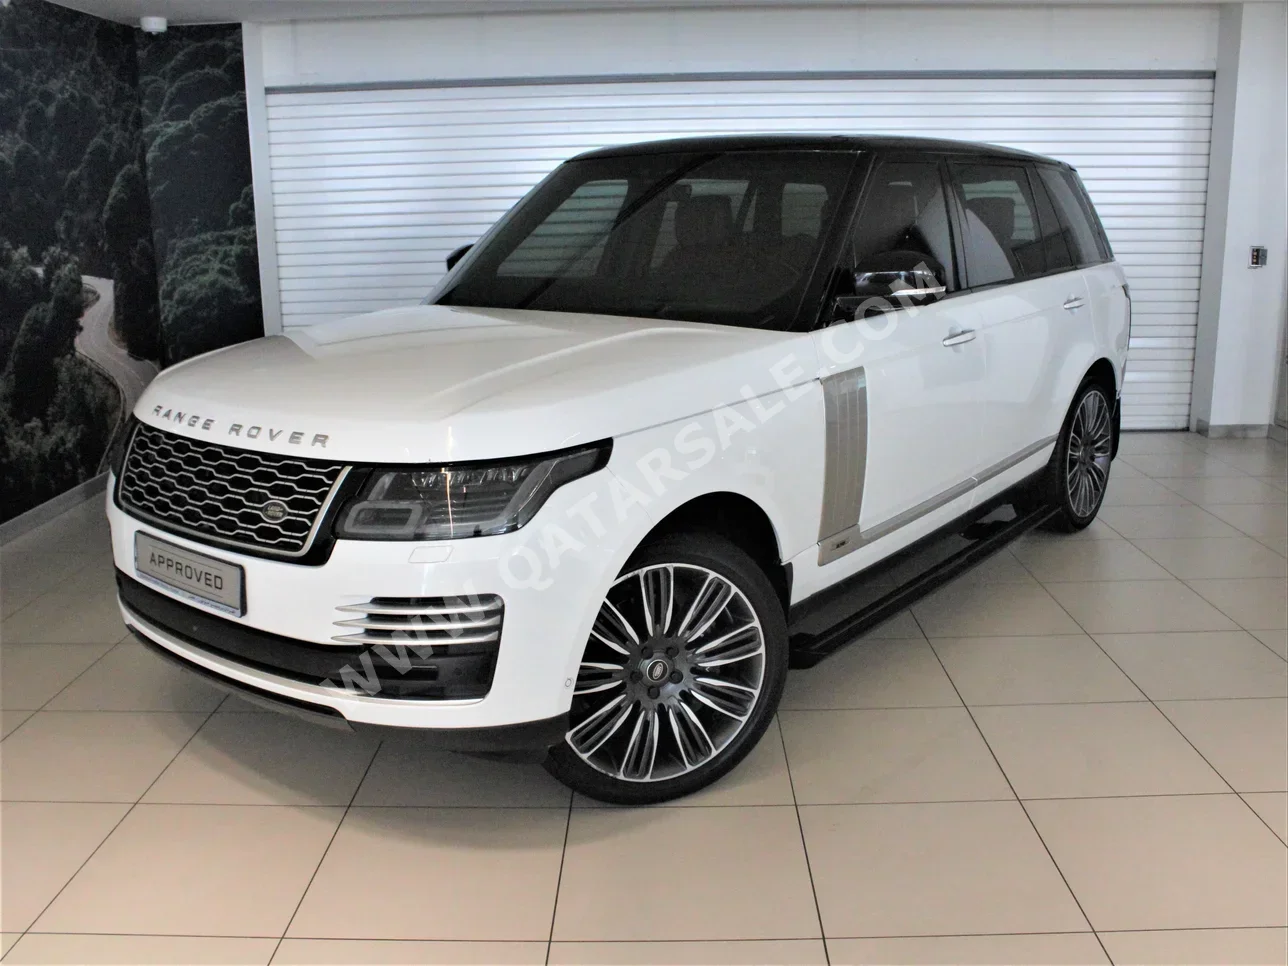 Land Rover  Range Rover  Vogue  2020  Automatic  40,000 Km  6 Cylinder  Four Wheel Drive (4WD)  SUV  White  With Warranty